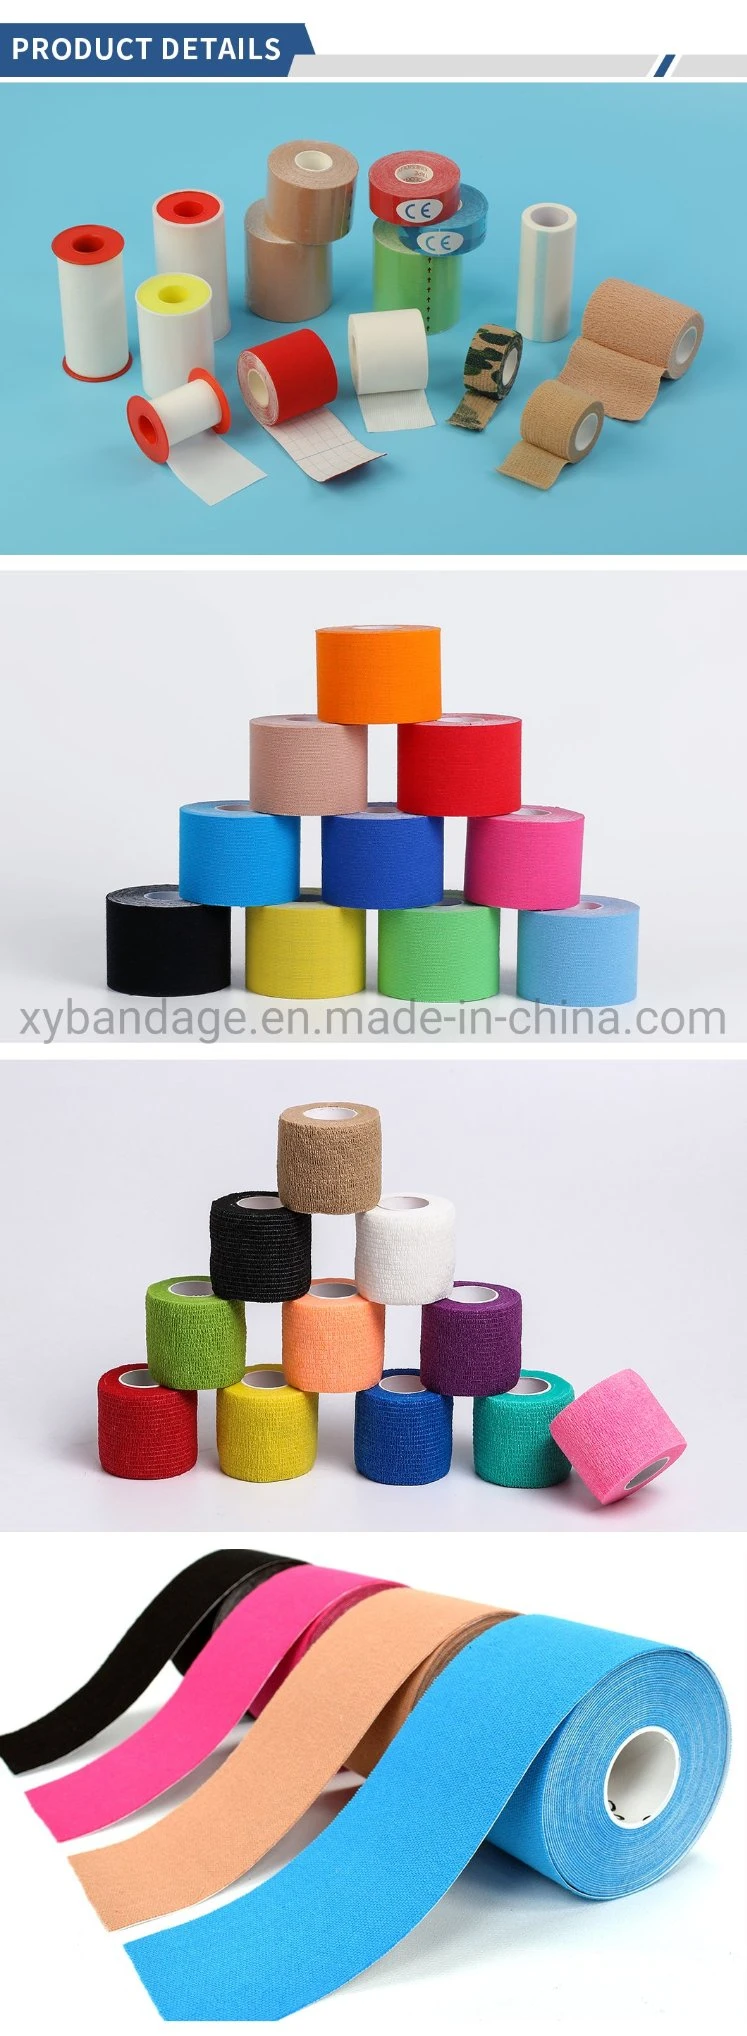 Manufacture ISO13485 Approved Colorful Adhesive Medical Products Cohesive Body Tape Elastic Cotton Bandage